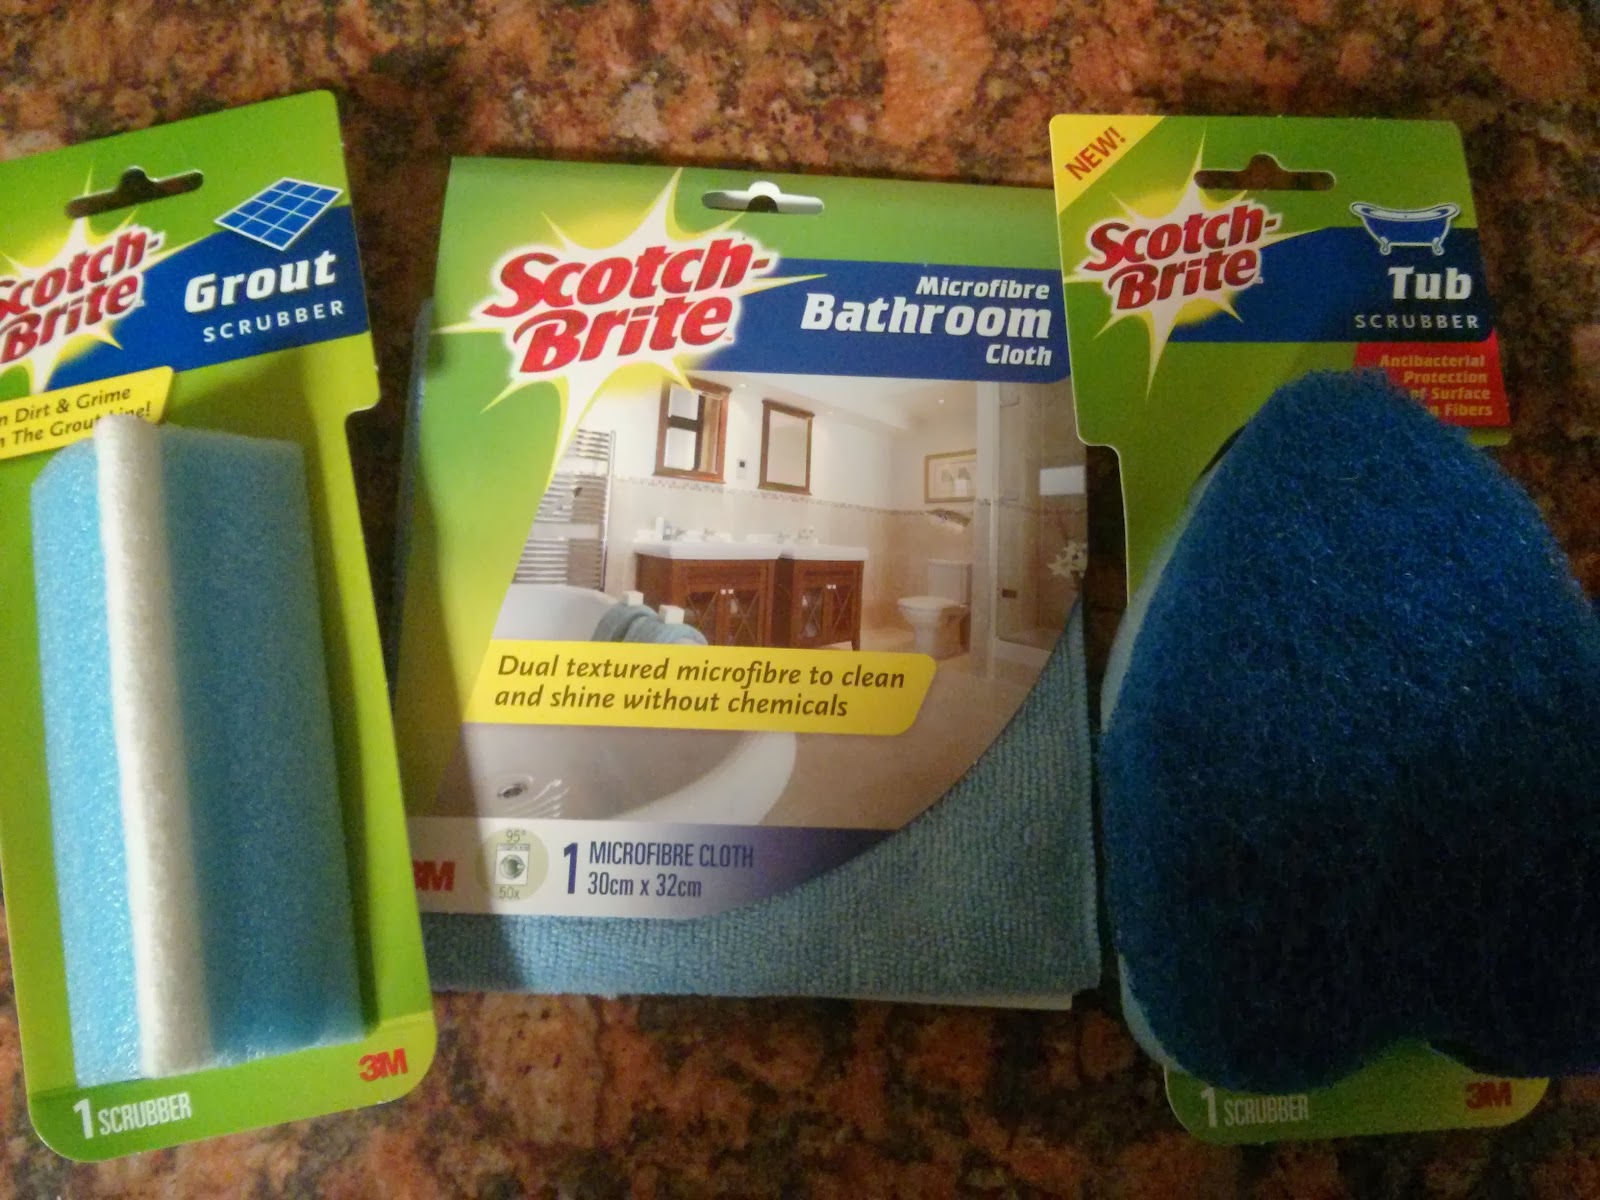 Scotch Brite Bathroom Cleaning Products